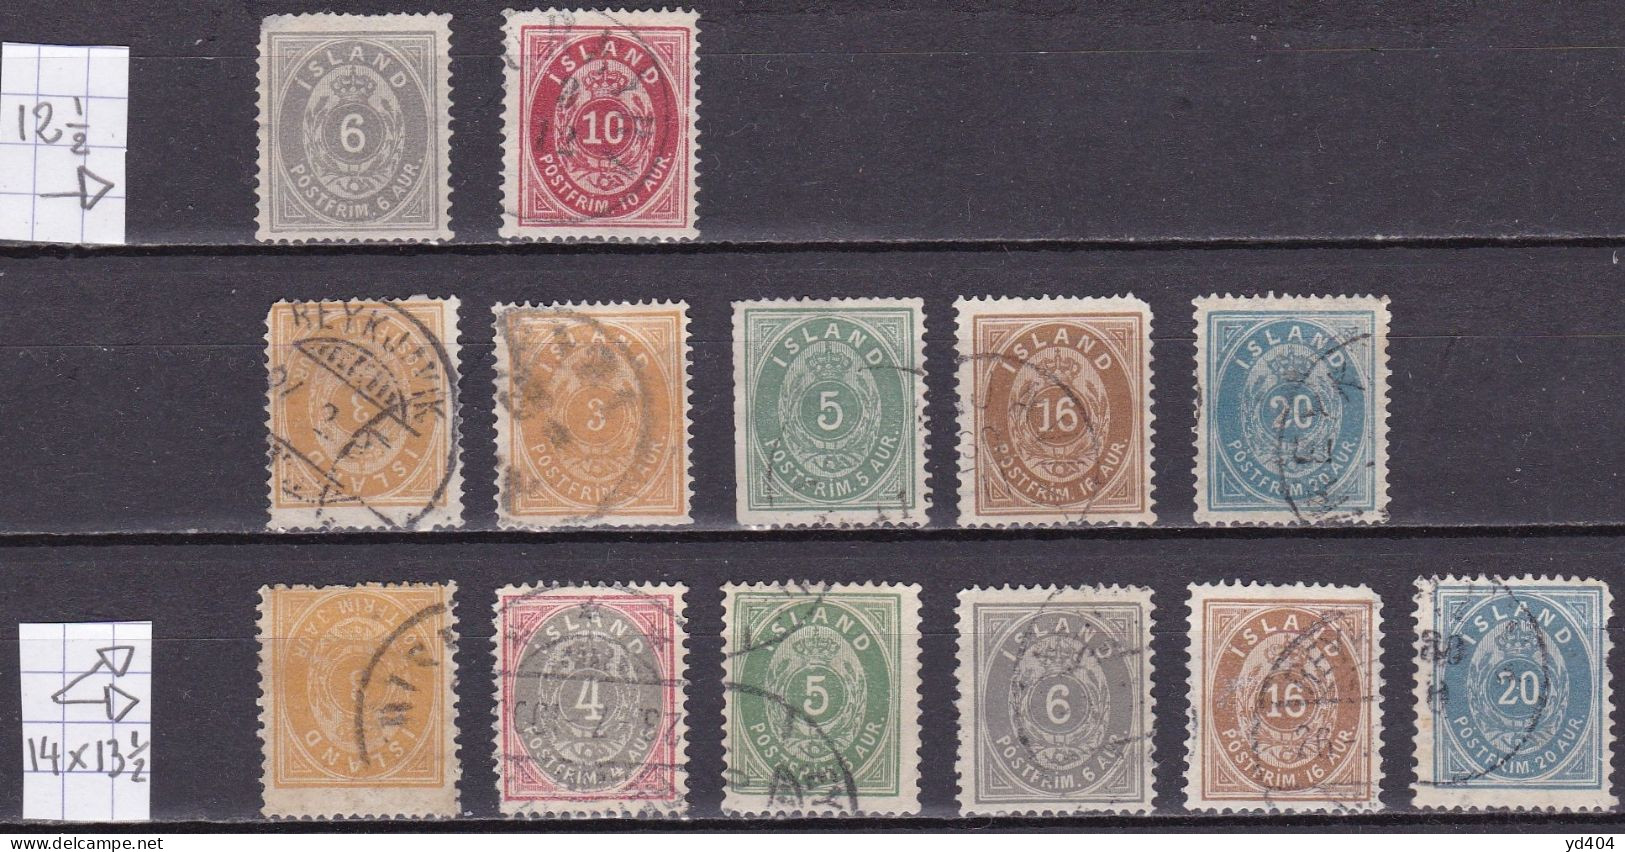 IS004 – ISLANDE – ICELAND – 1876/98 – NUMERAL VALUE LOT - SC # 10-28 USED 335 € - Oblitérés